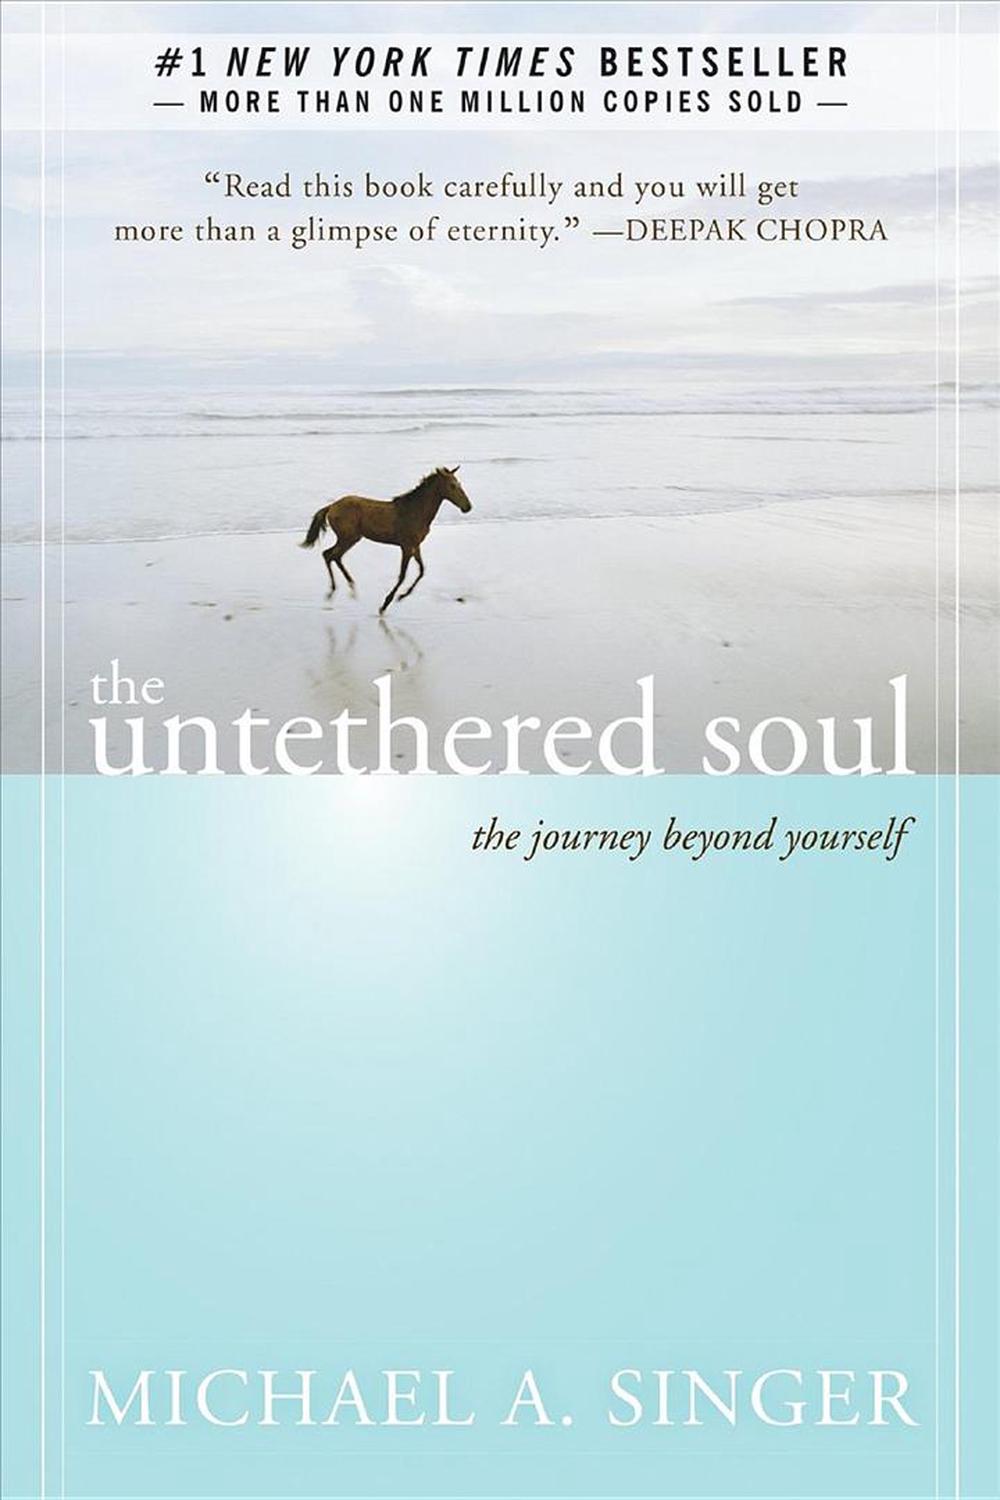 book the untethered soul by michael singer